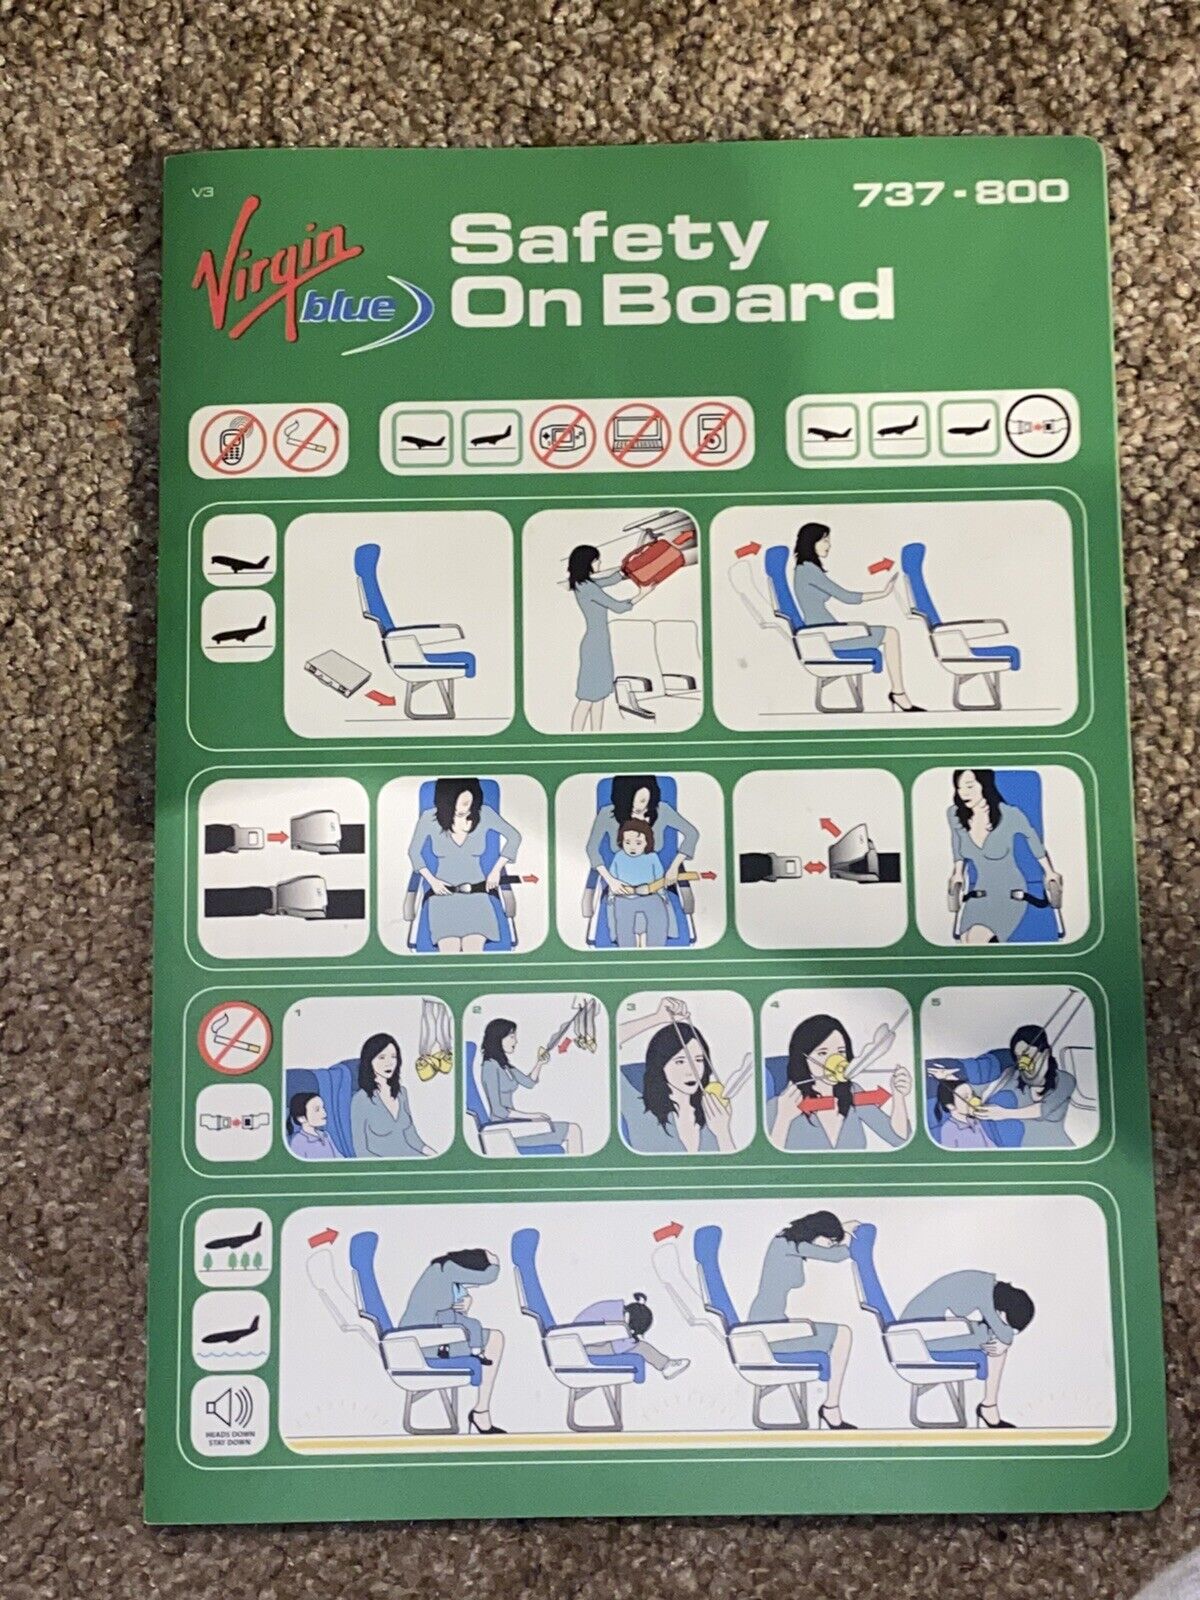 VIRGIN BLUE AUSTRALIA BOEING 737 800 SAFETY CARD NEW MINT Low Cost